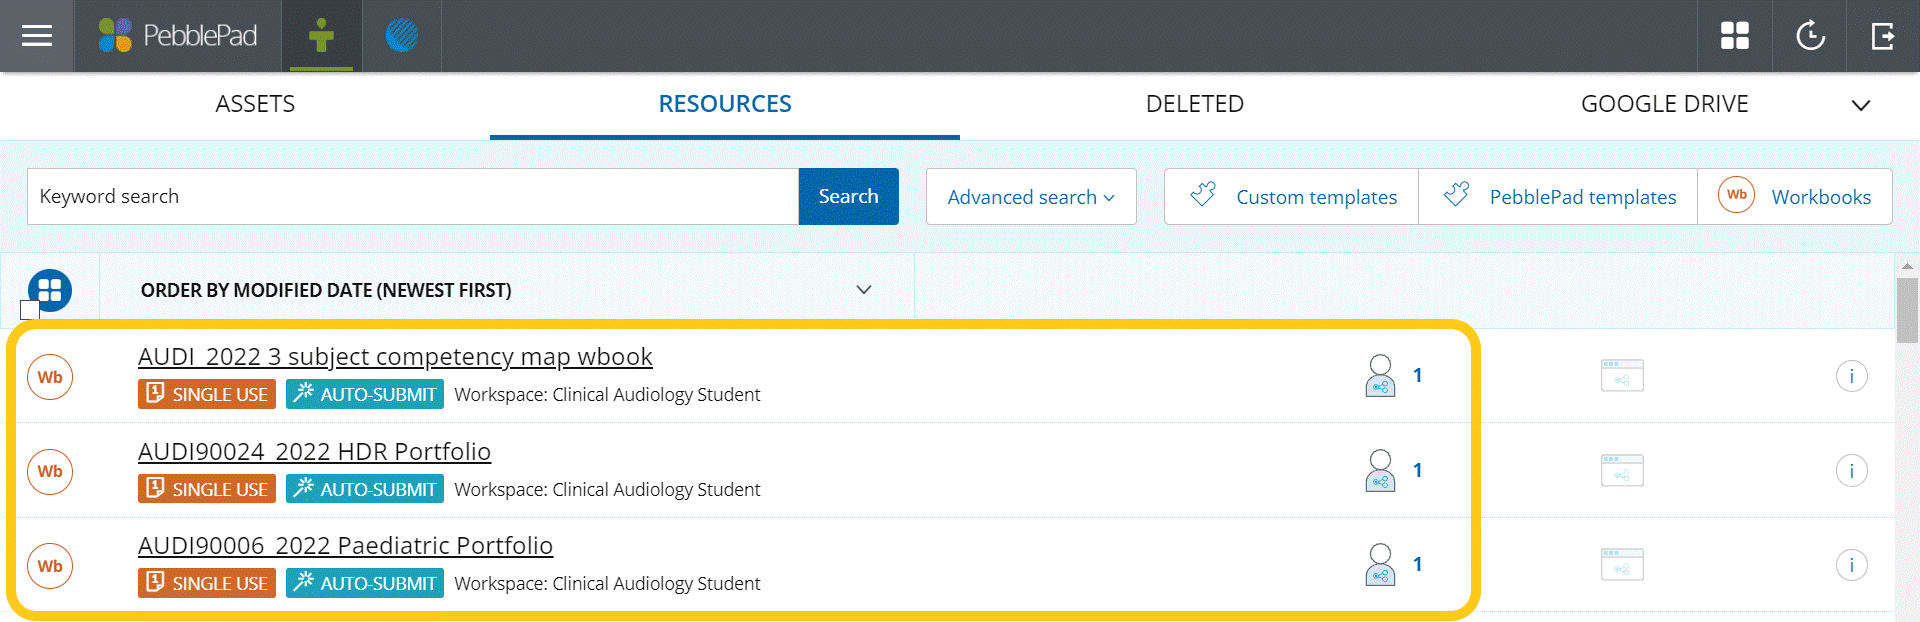 Shared resources in the PebblePad ‘Resource Store’